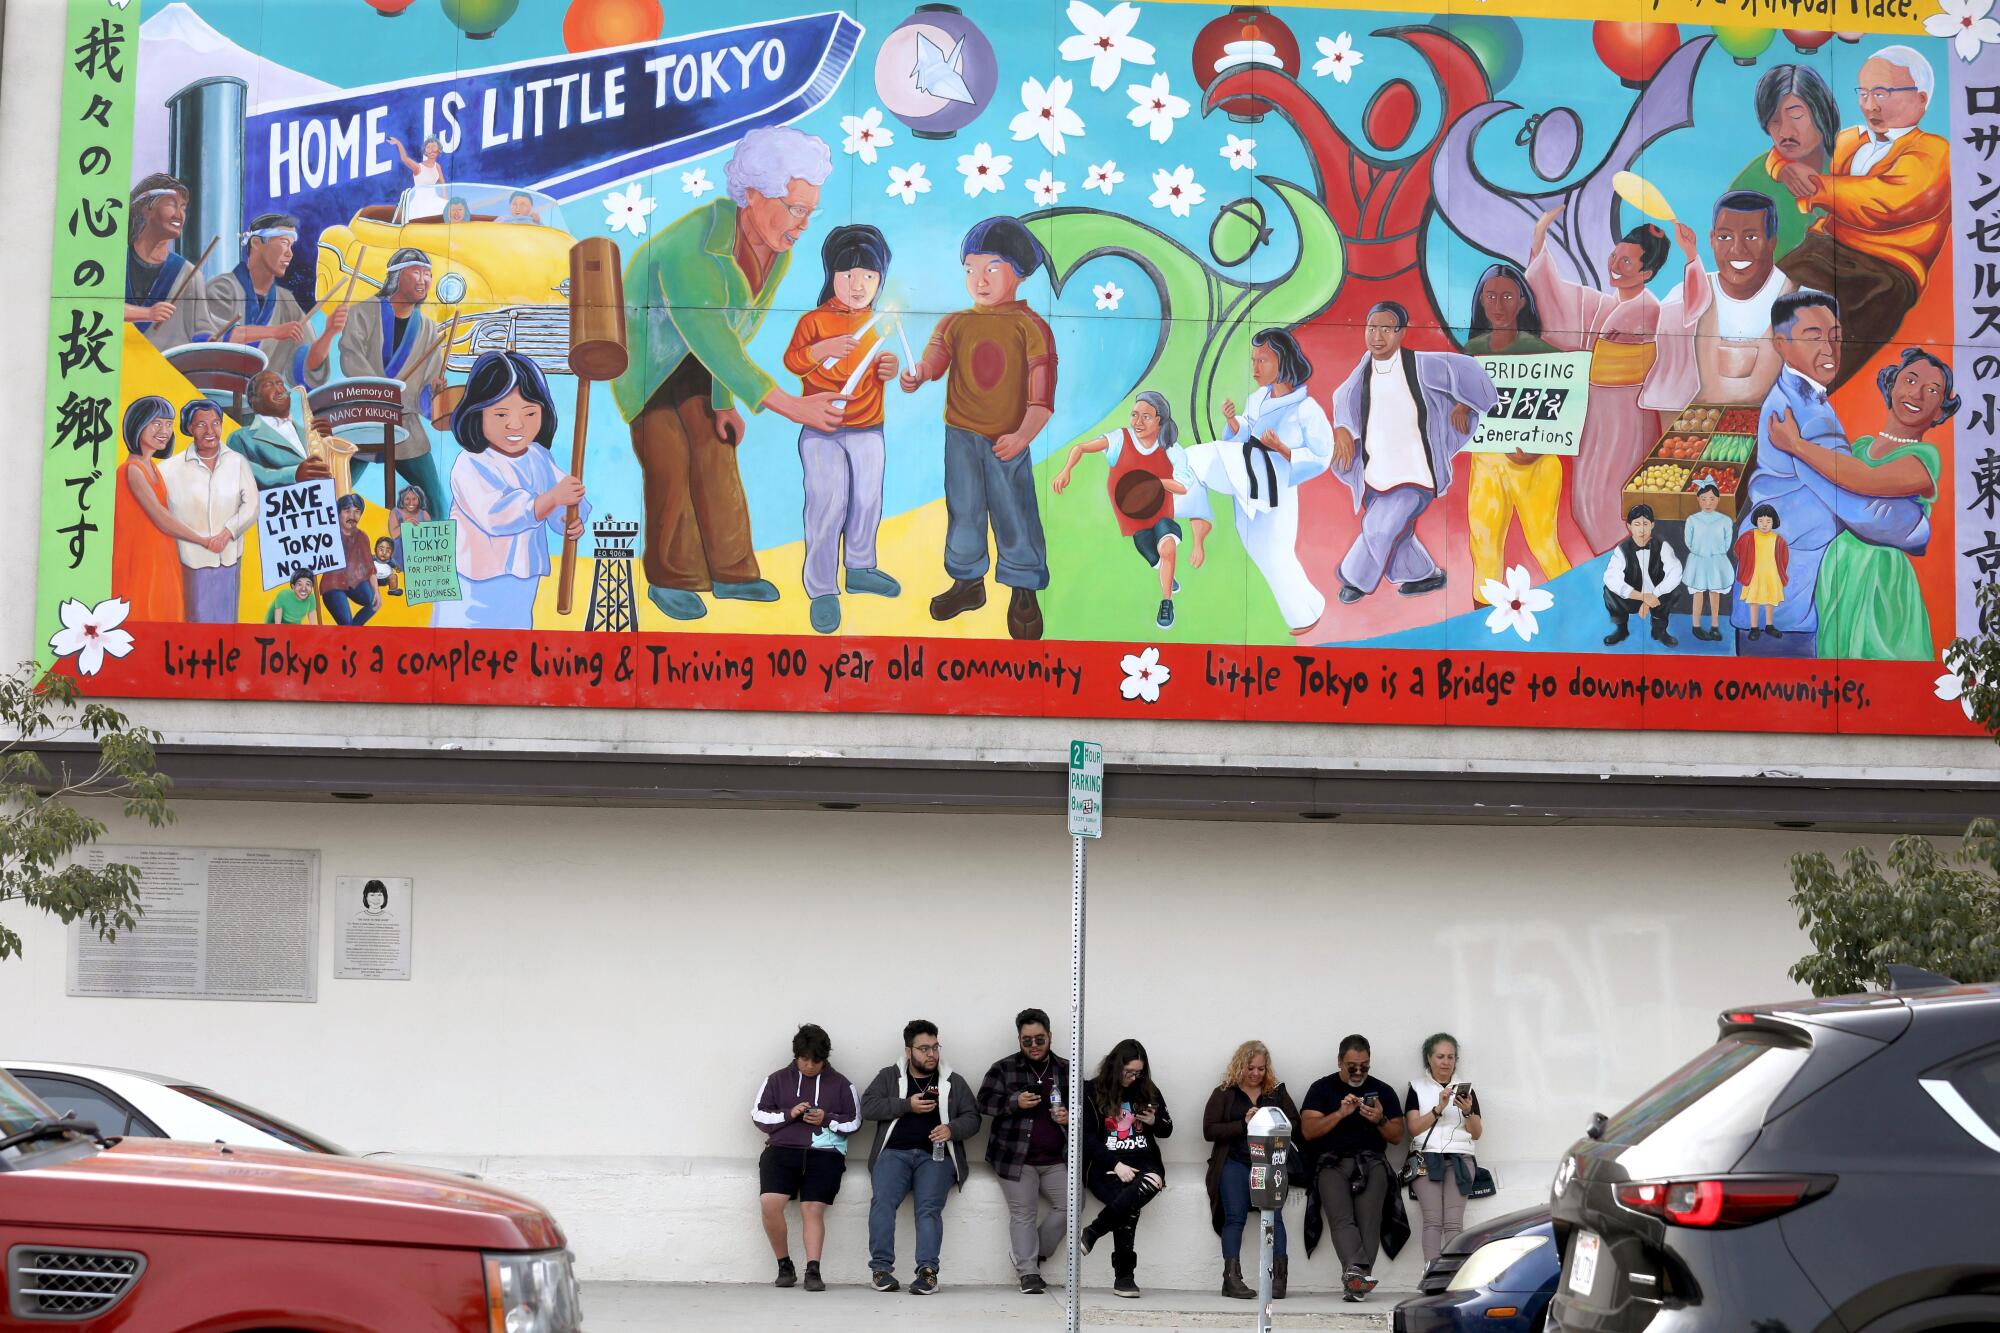 Visitors spend an idle moment together in Little Tokyo under a colorful mural of people.